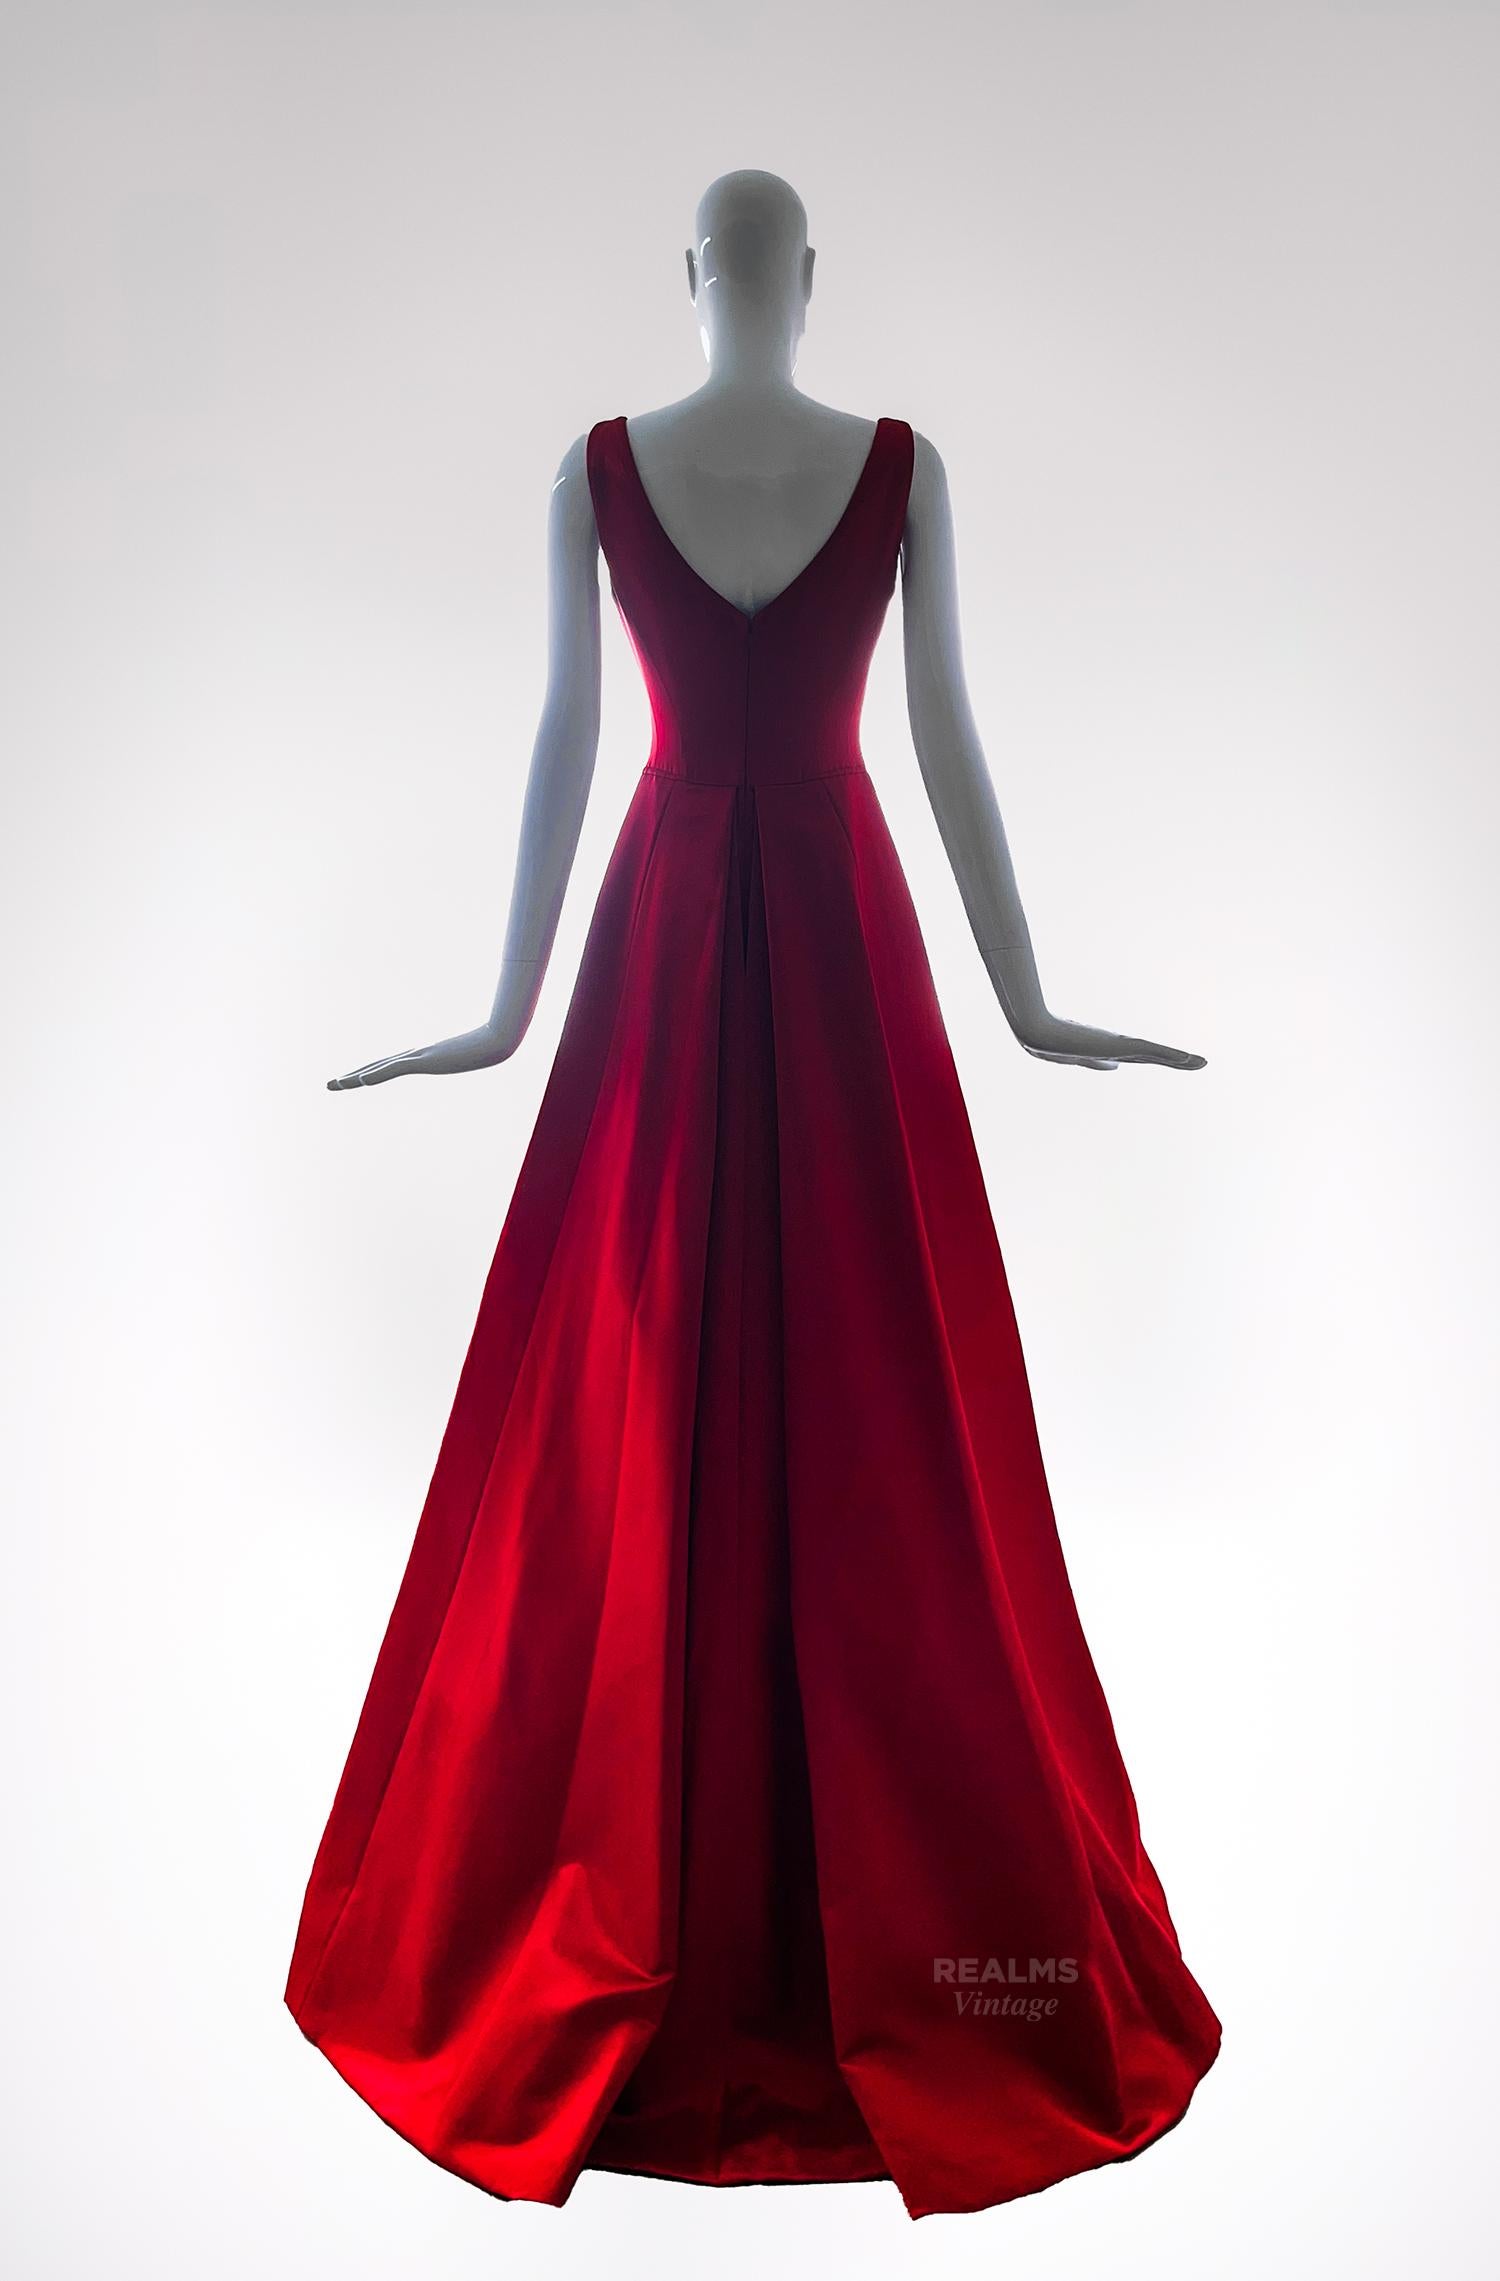  Thierry Mugler Couture FW1999 Goddess Silk Evening Gown Red Dress For Sale 1